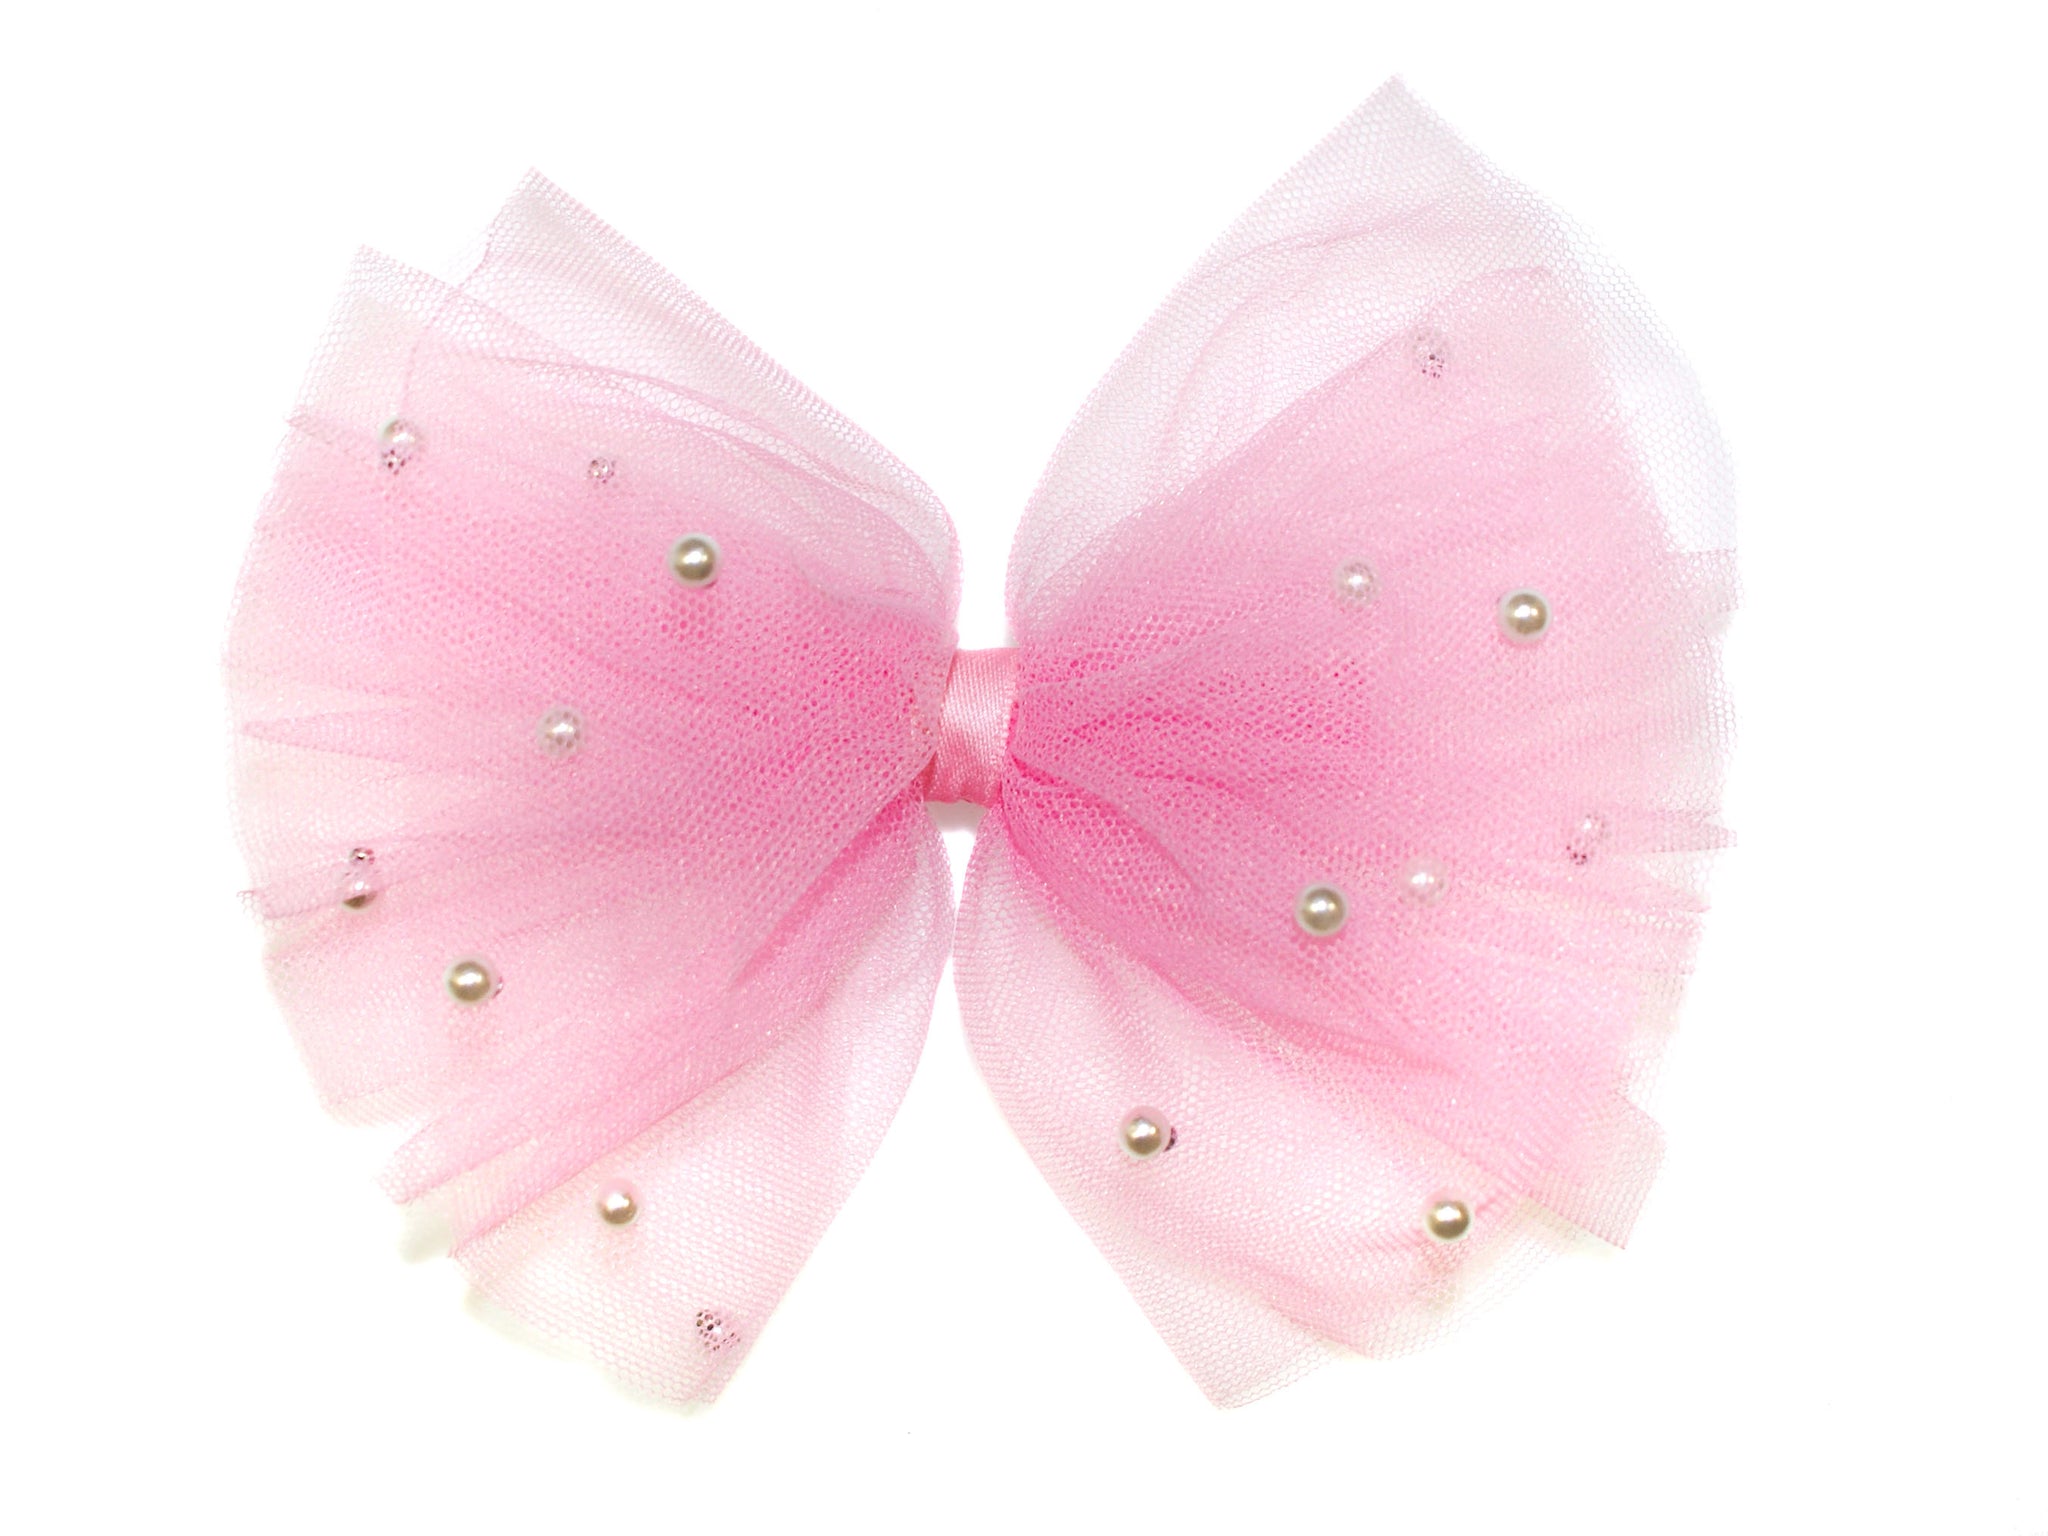 Pearl Tulle Big Bow Clip - Dark Pink